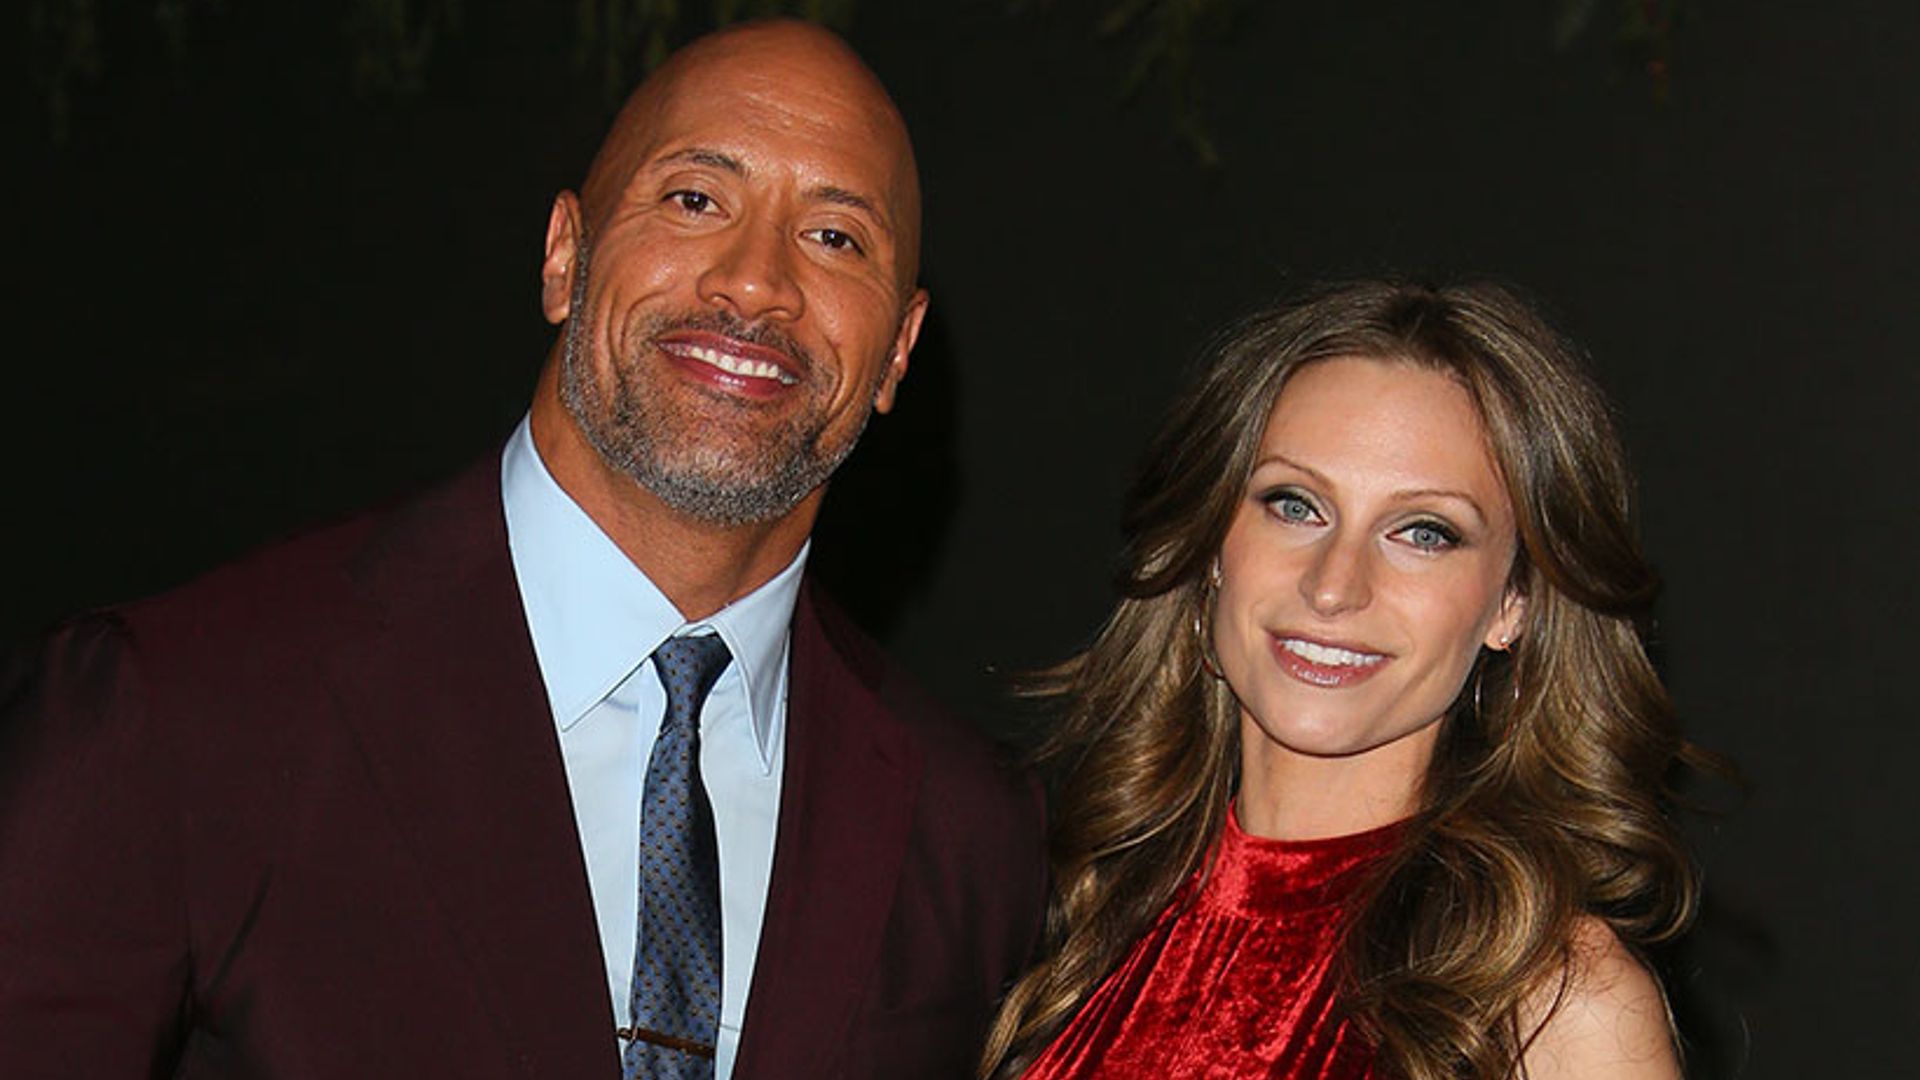 Dwayne 'The Rock' Johnson and girlfriend Lauren Hashian are having another baby!